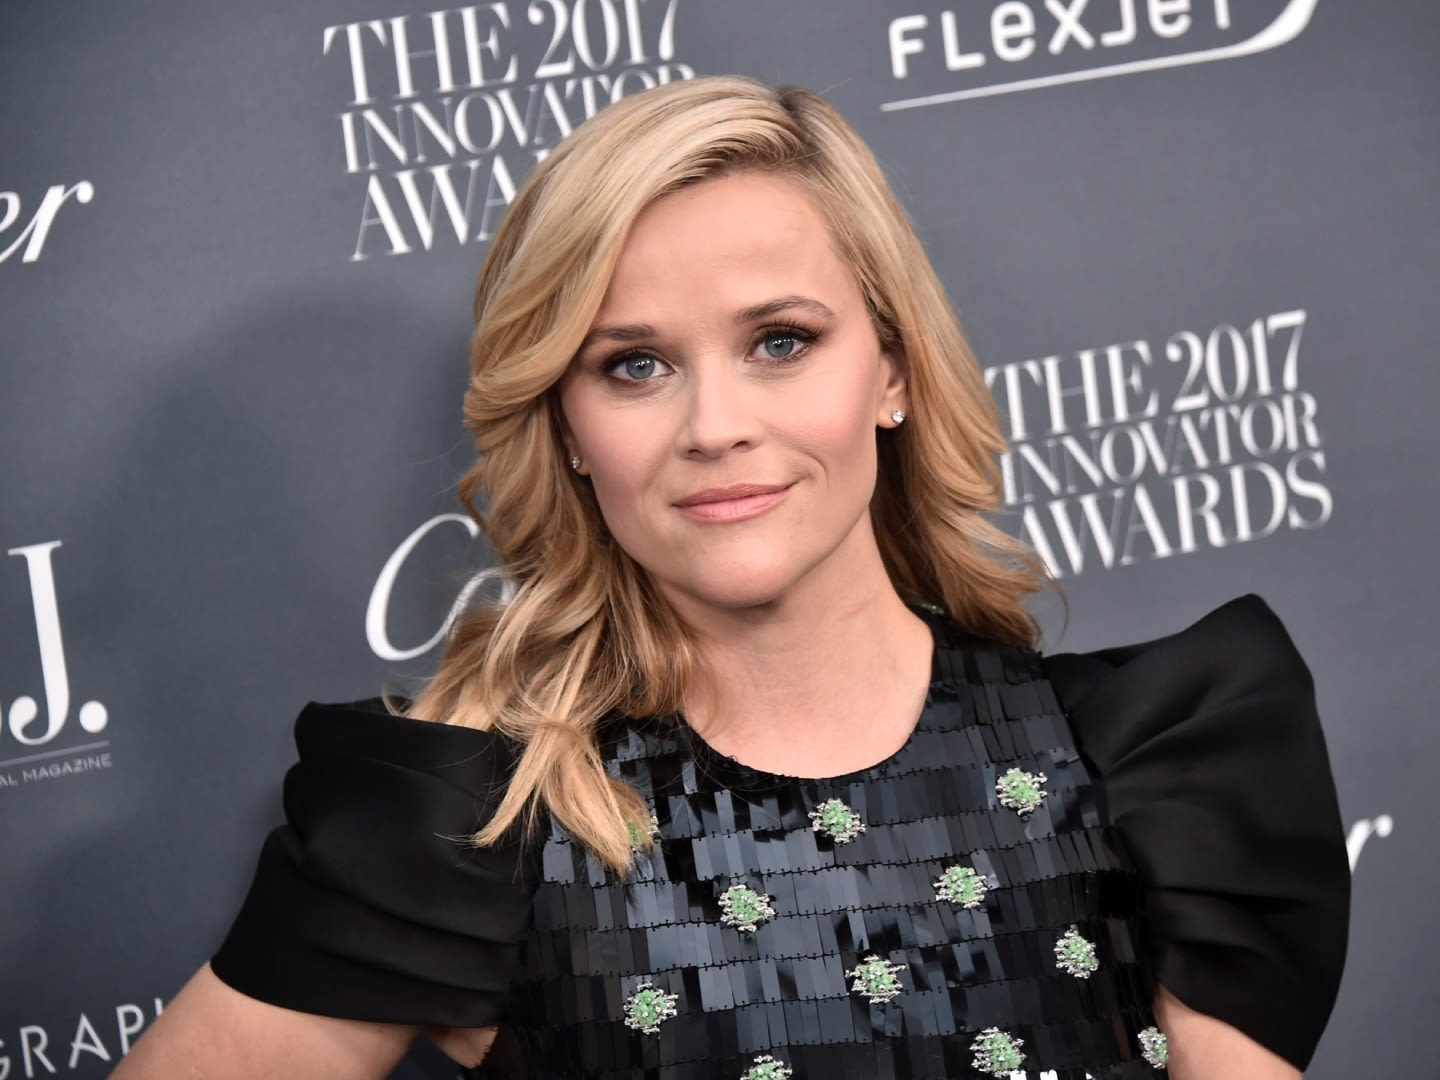 Shoppers ‘Never Had Skin So Smooth’ After Using This Reese Witherspoon-Approved Brand’s Body Scrub